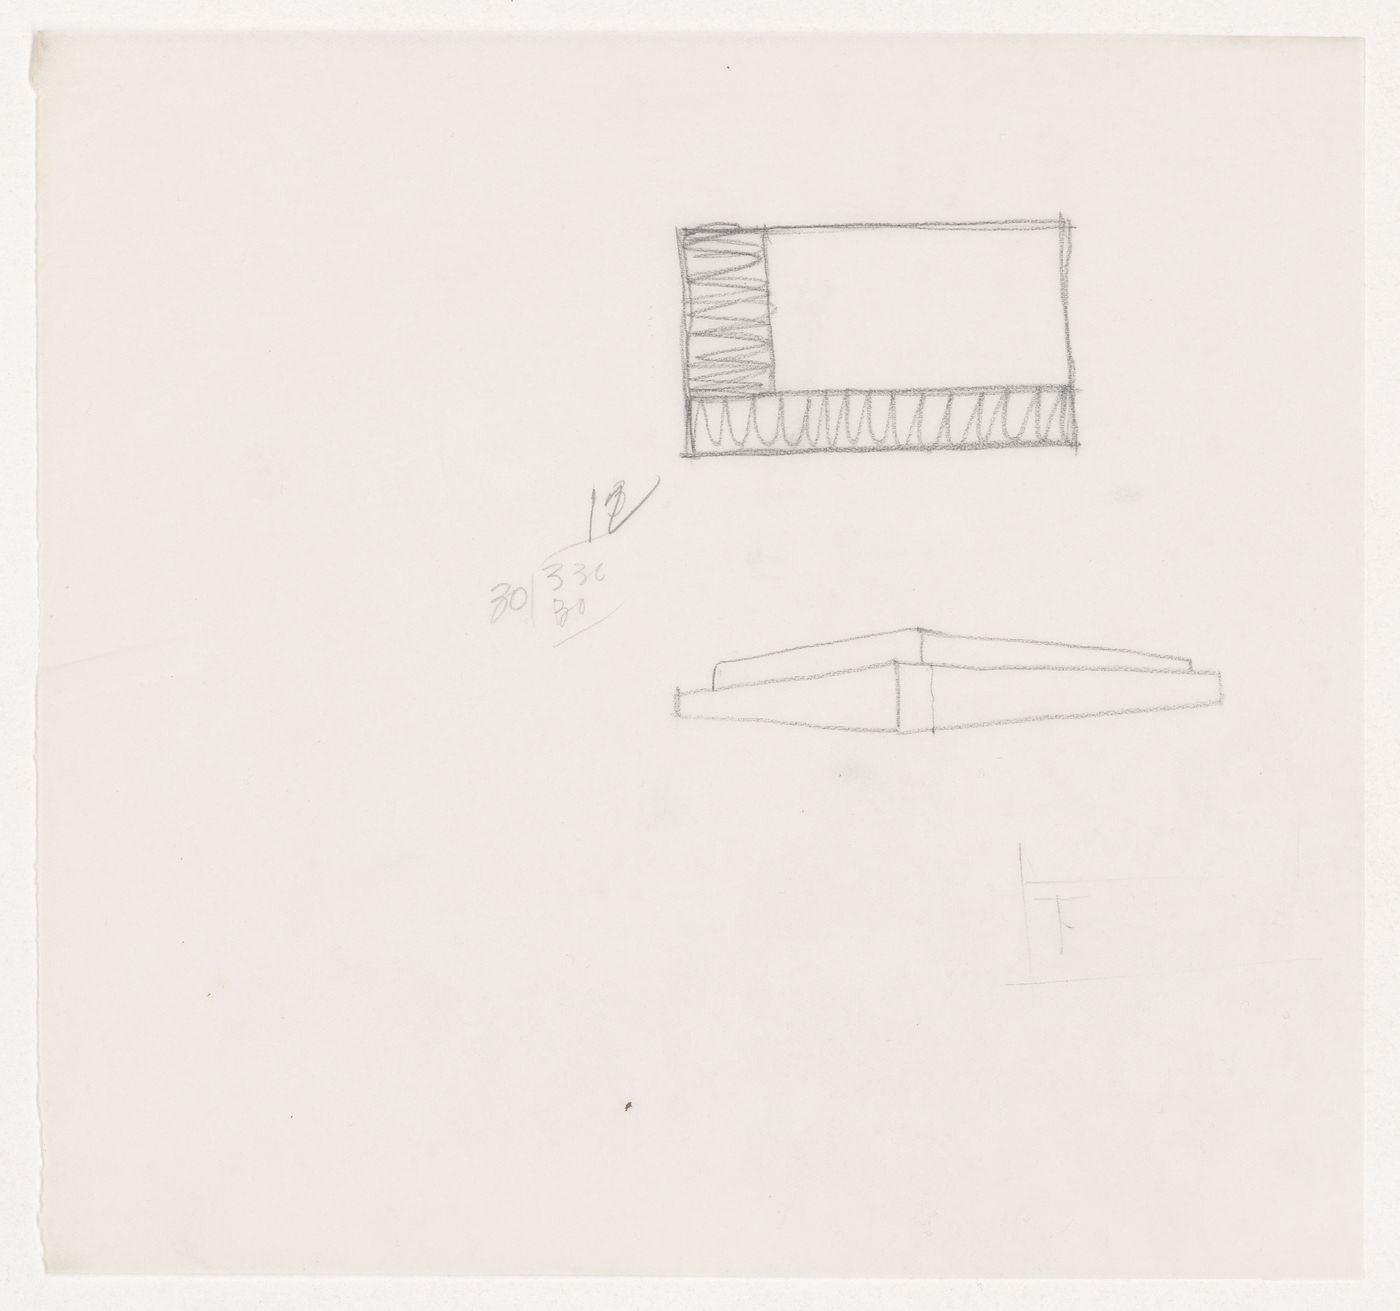 Sketch plan and eye-level perspective sketch for the Gymnasium